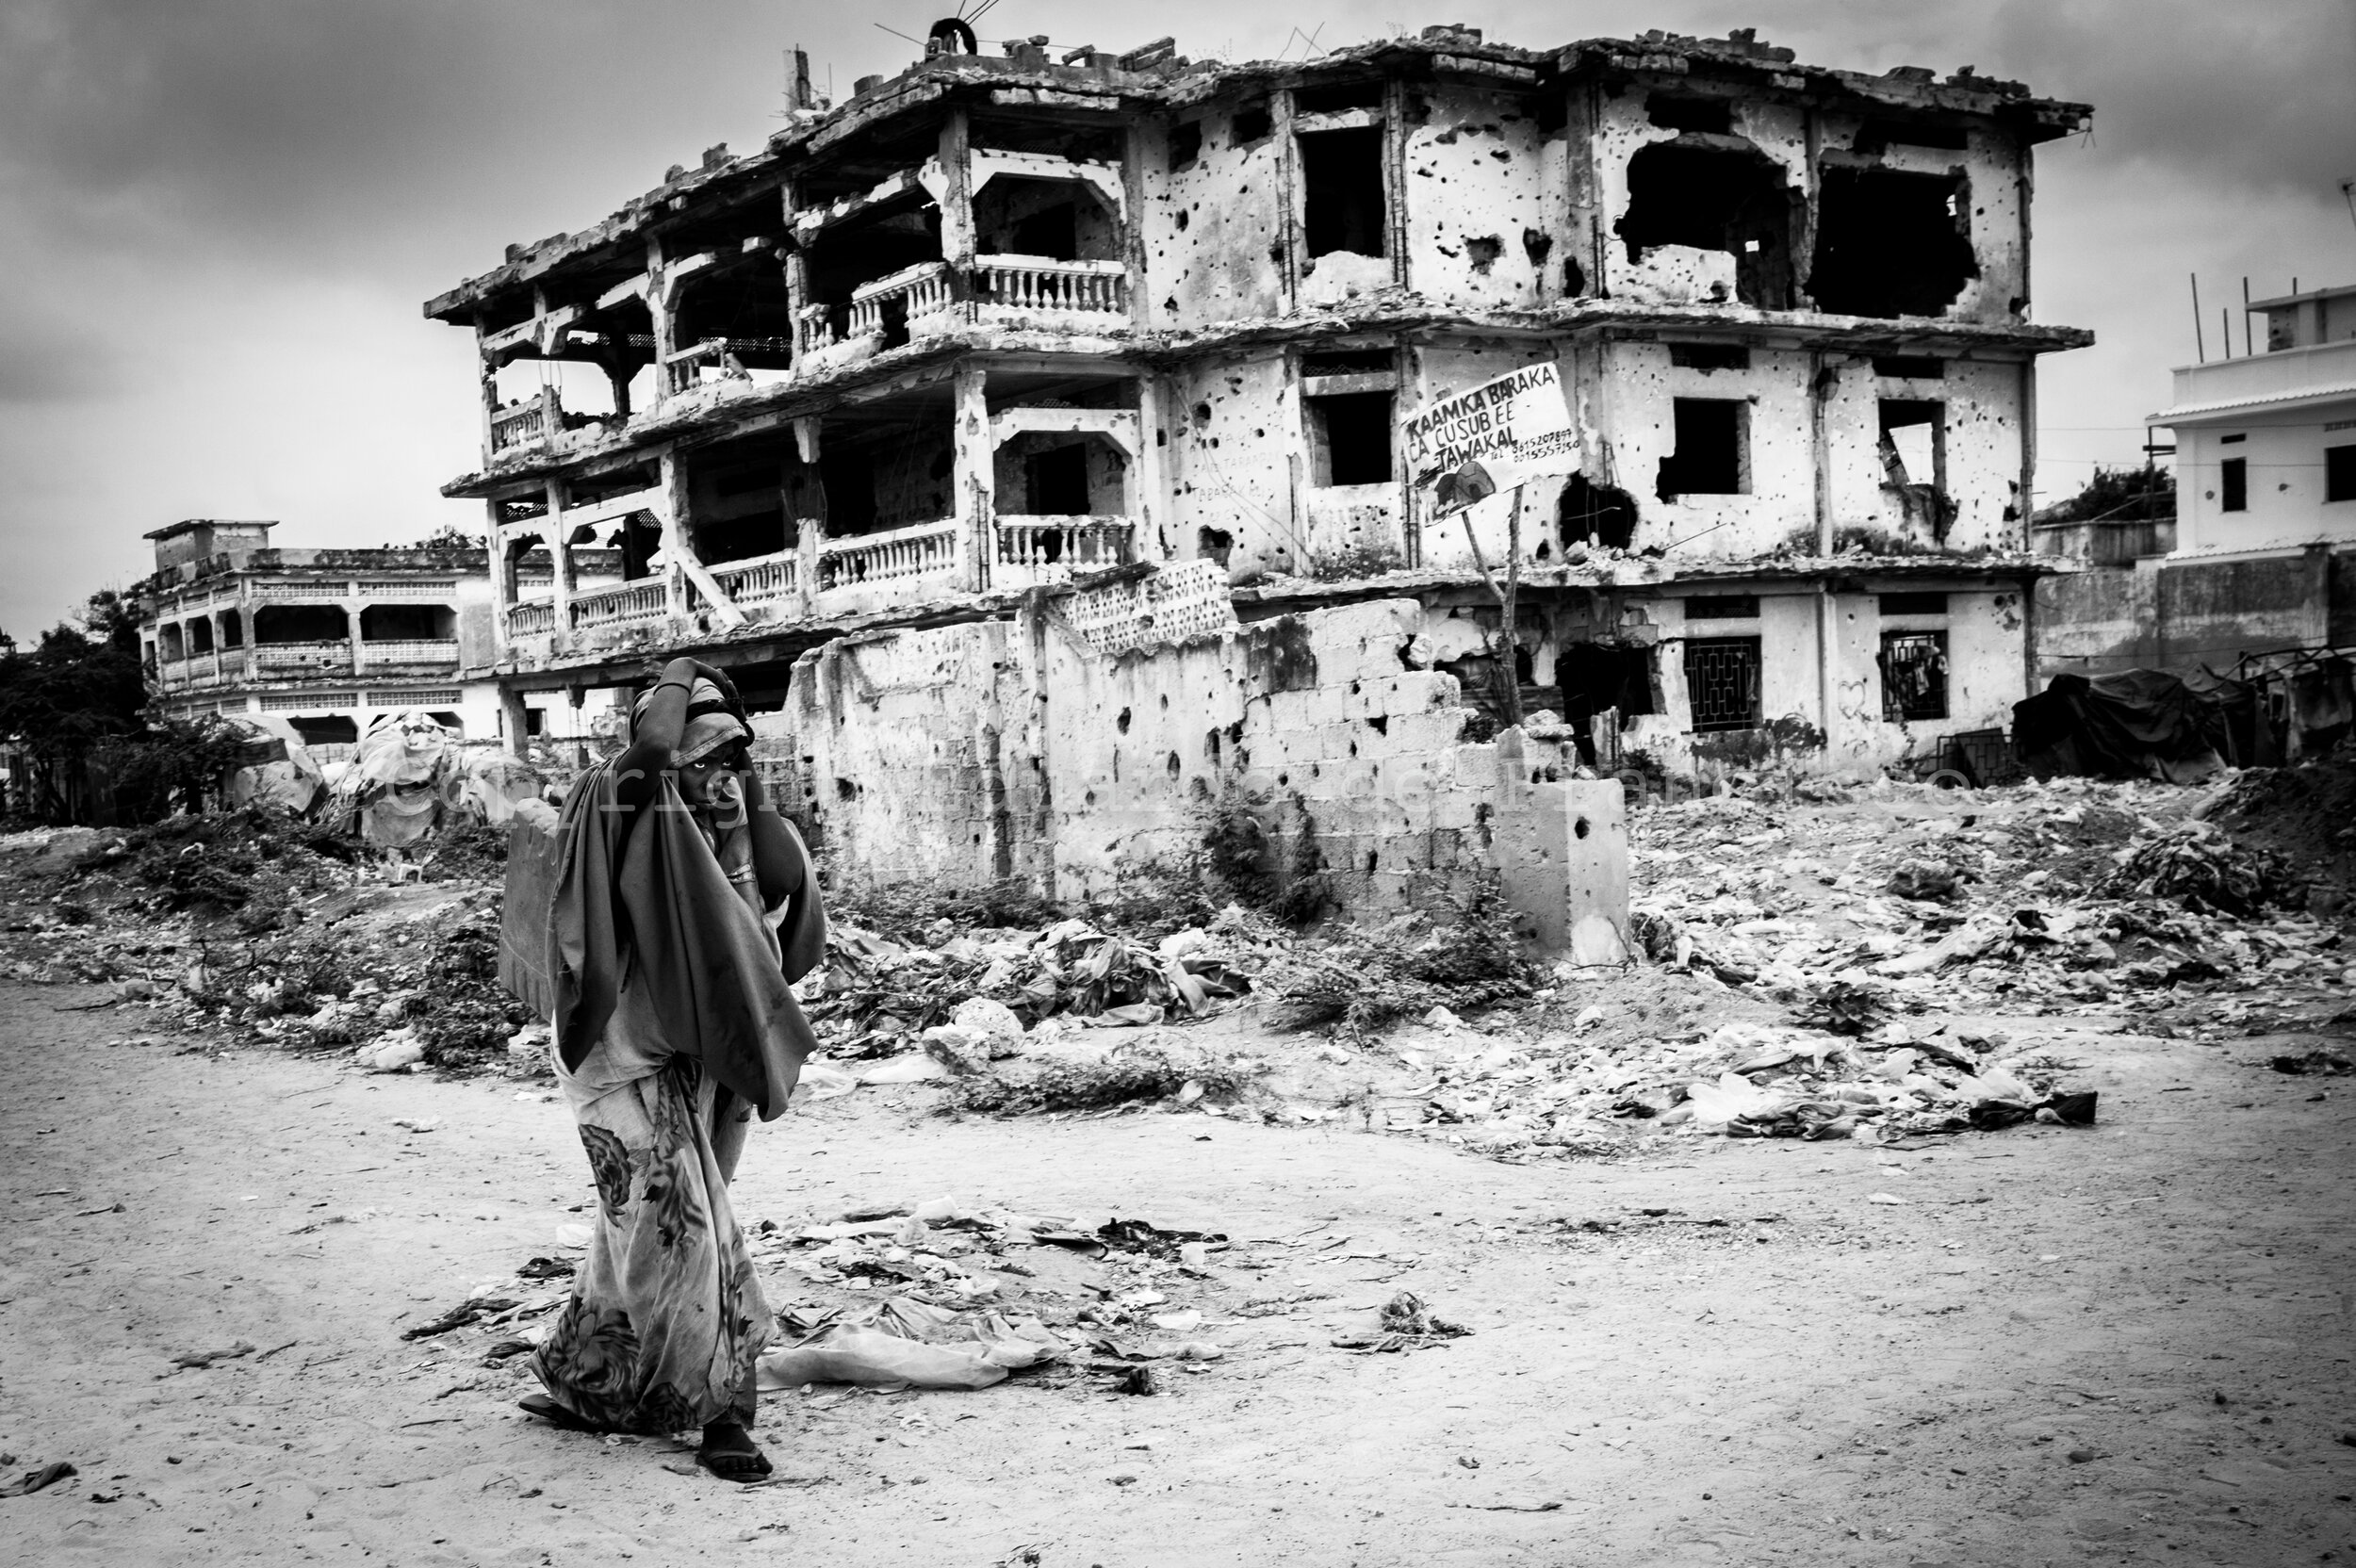  Scene near the Bakaara Market in Mogadishu, a city where no building is untouched by the ravages of the war, and most of them have been extensively damaged 